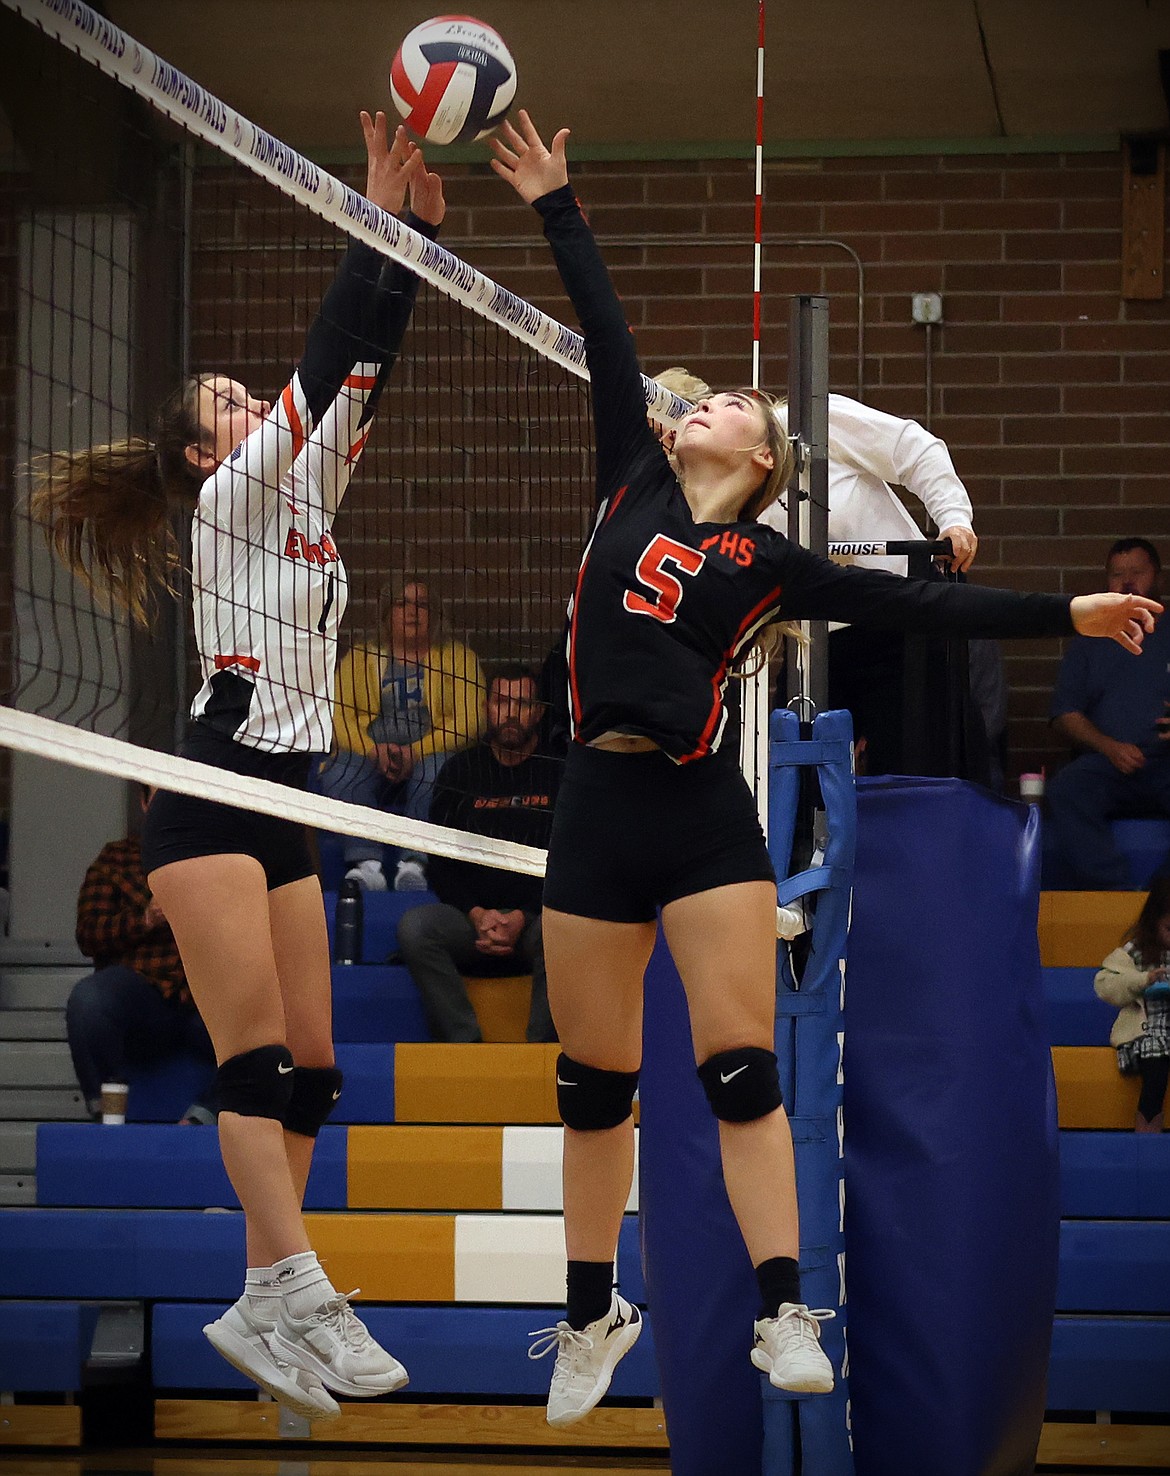 Plains player Marissa Young battles with Eureka's Aubrey Cazazza in a play at the net in the opening round of the 7B District Volleyball Tournament in Thompson Falls Friday. (Jeremy Weber/Daily Inter Lake)